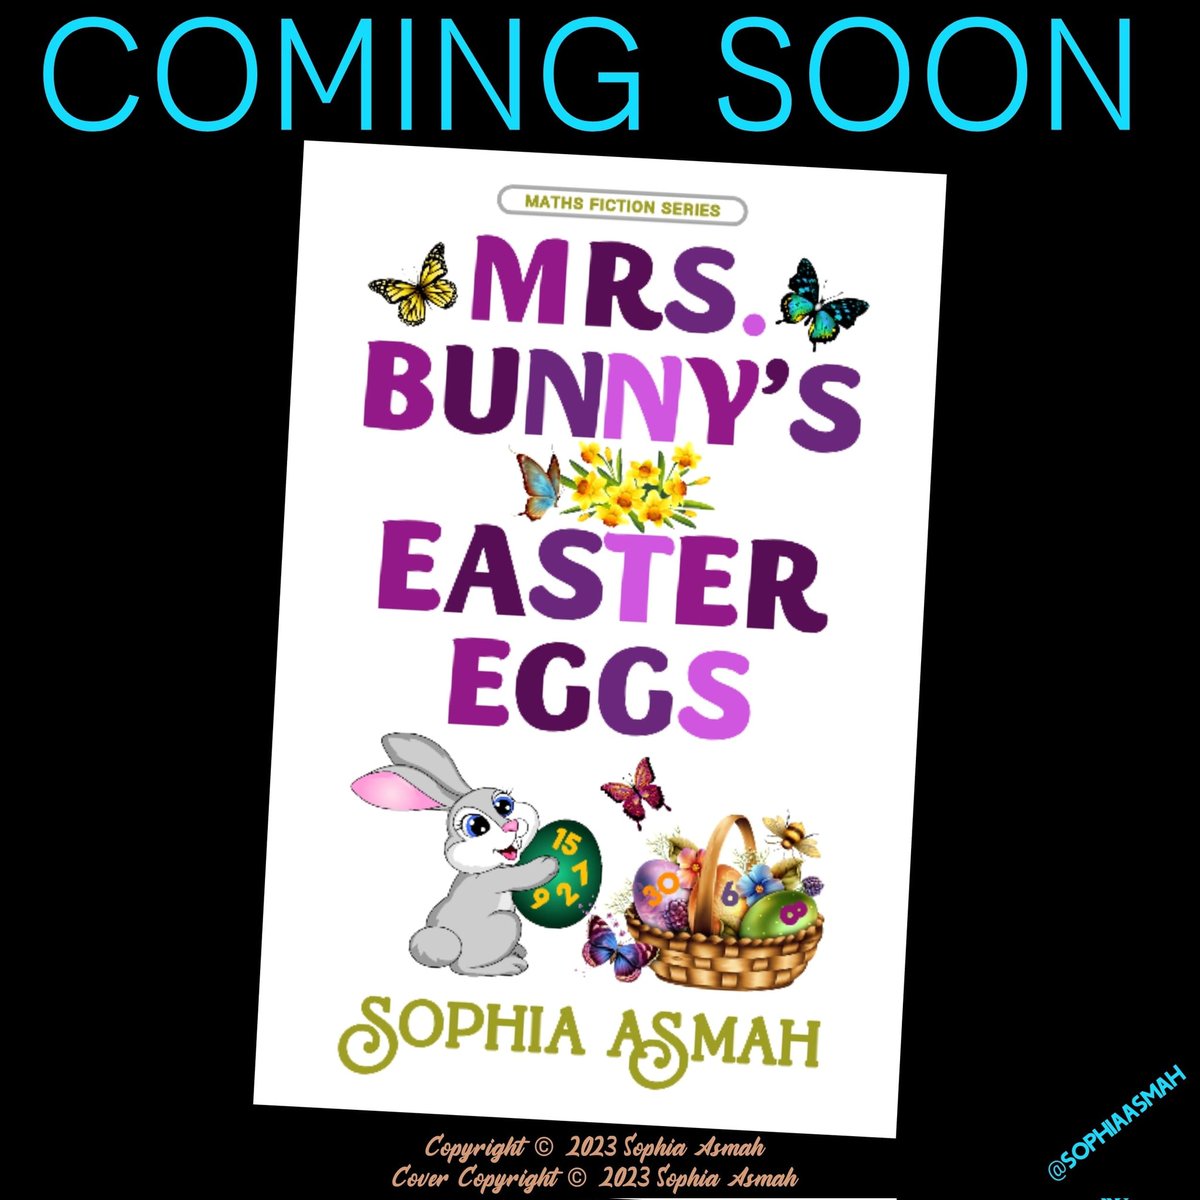 Book cover completed by @AsmahSo for her upcoming book 'MRS. BUNNY'S EASTER EGGS'
Copyright ©2023 Sophia Asmah
Cover Copyright ©2023 Sophia Asmah 
#childrensbooks #kidslit #mathsfiction #books #WritingCommunity #BookTwitter #author #BookCovers #sophiaasmah #art #sophiaasmahbooks